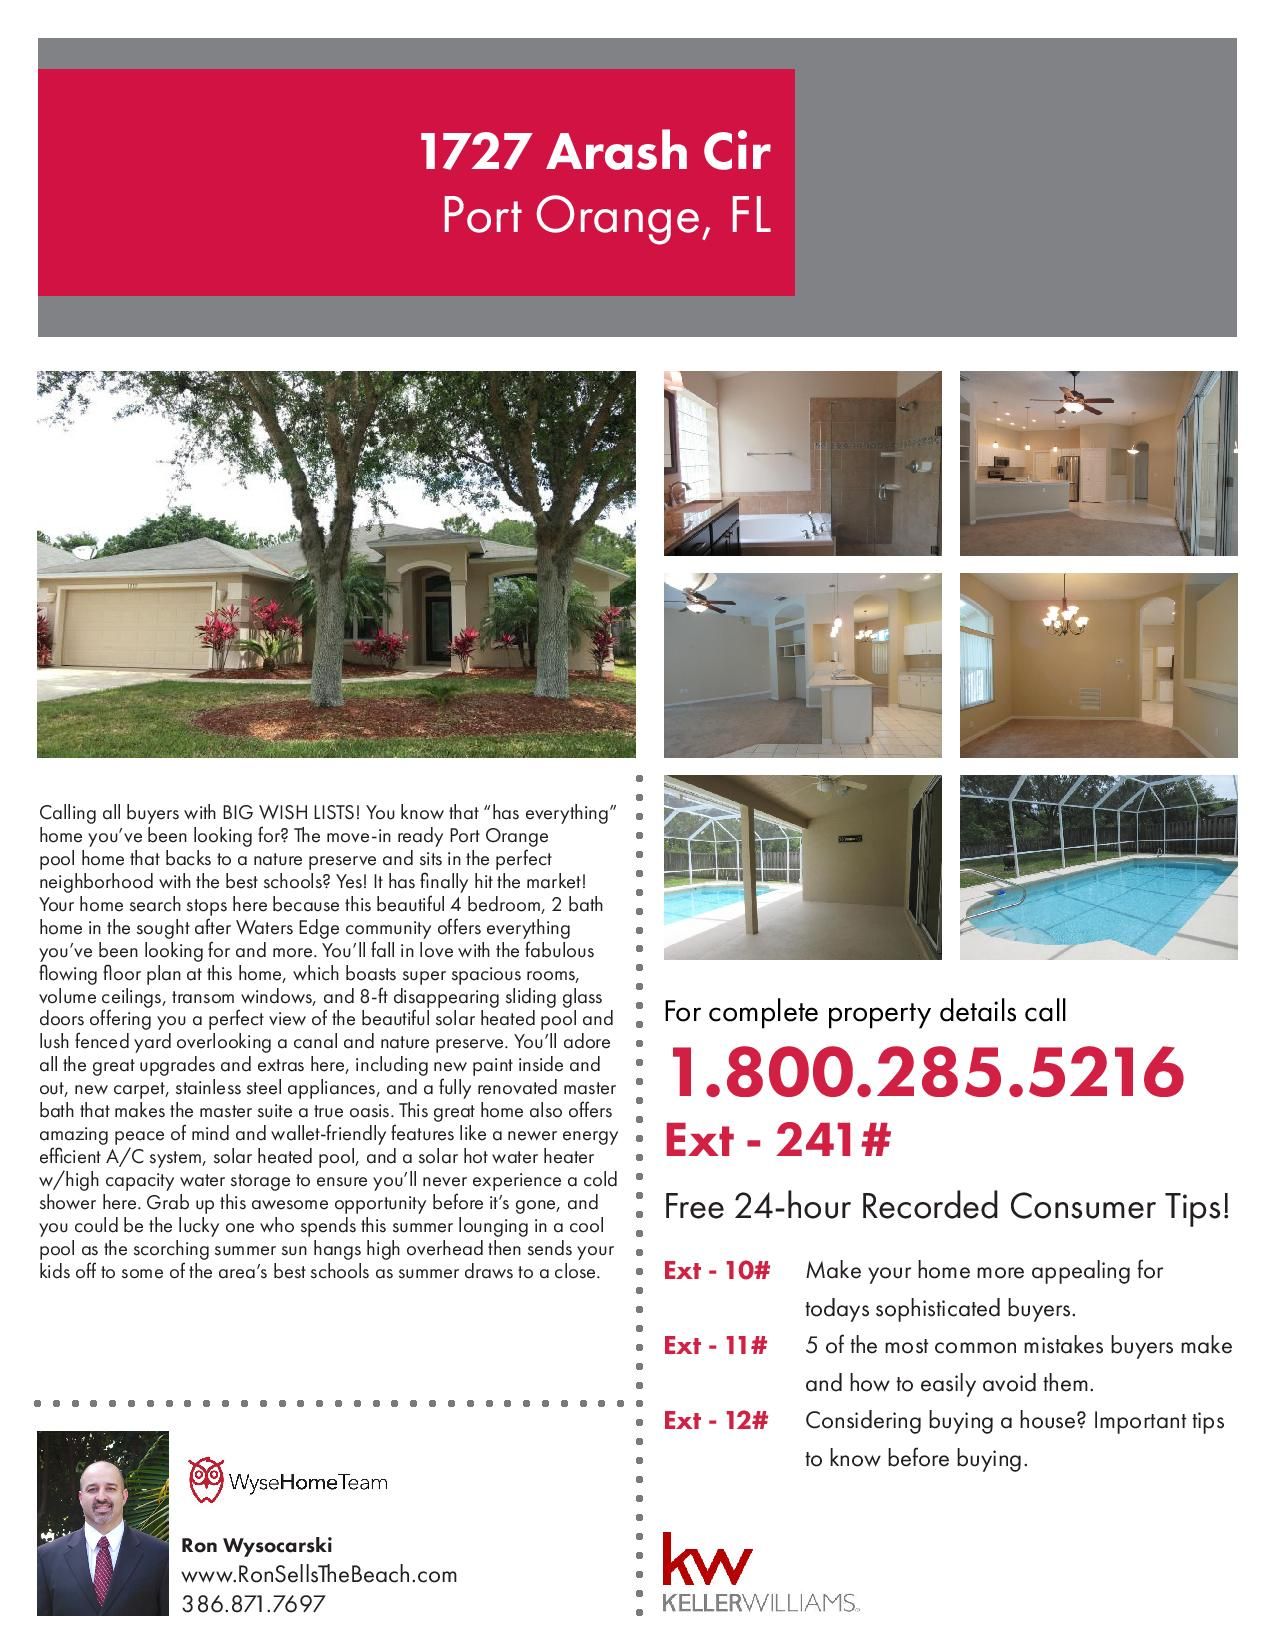 1727 Arash Cir, Port Orange, FL. Your home search stops here because ...